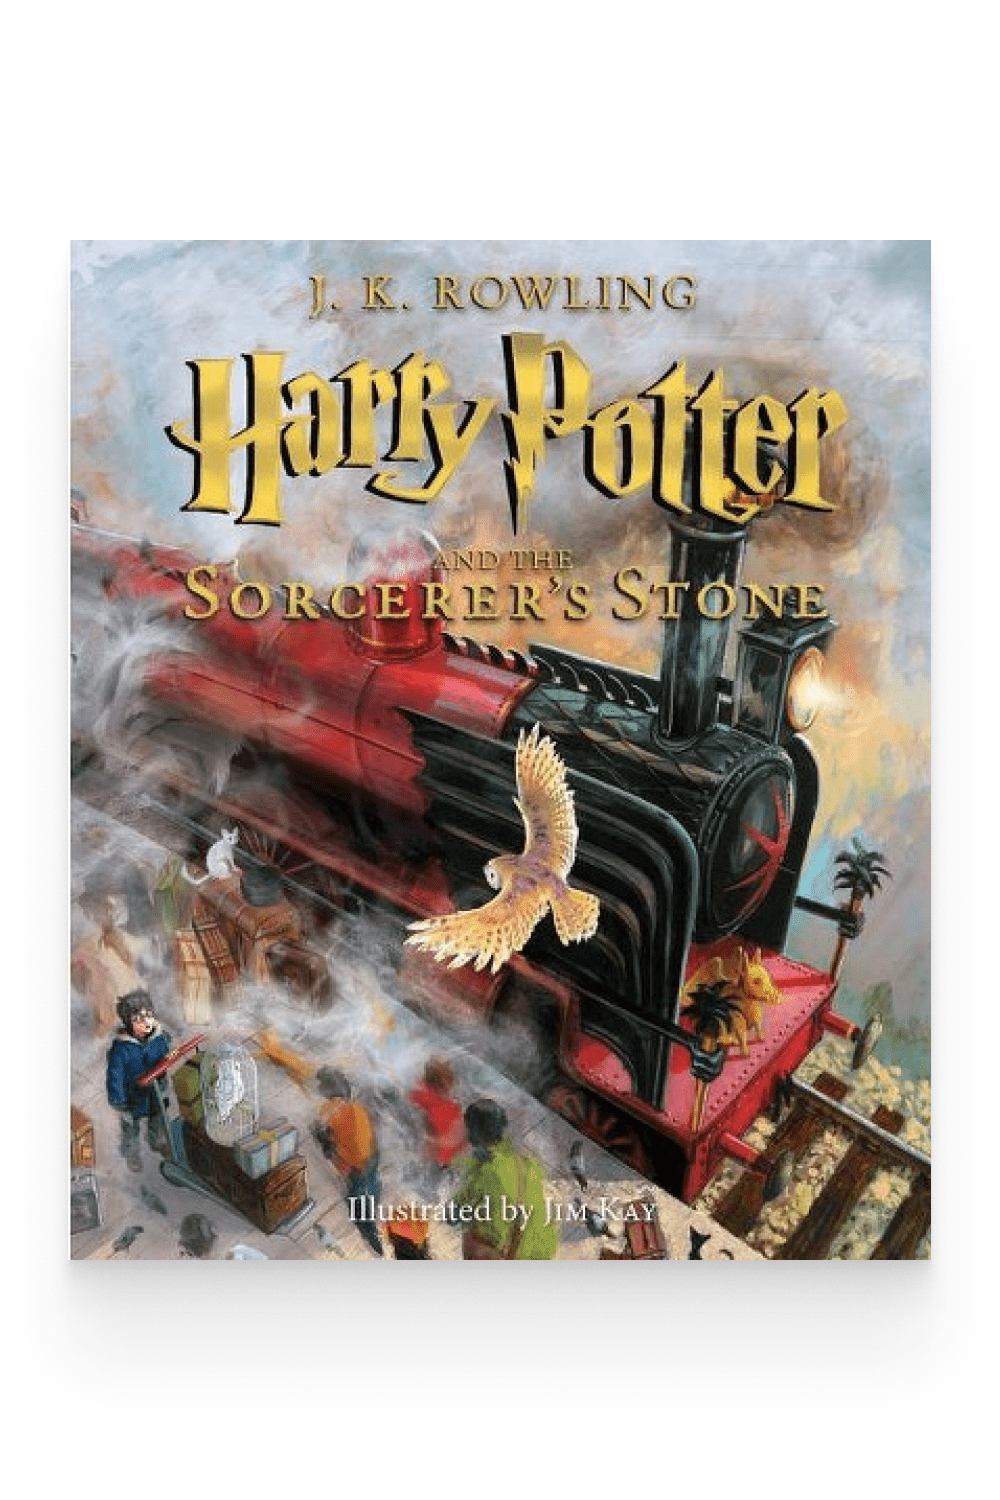 Cover of the book Harry Potter and the Sorcerer Stone.